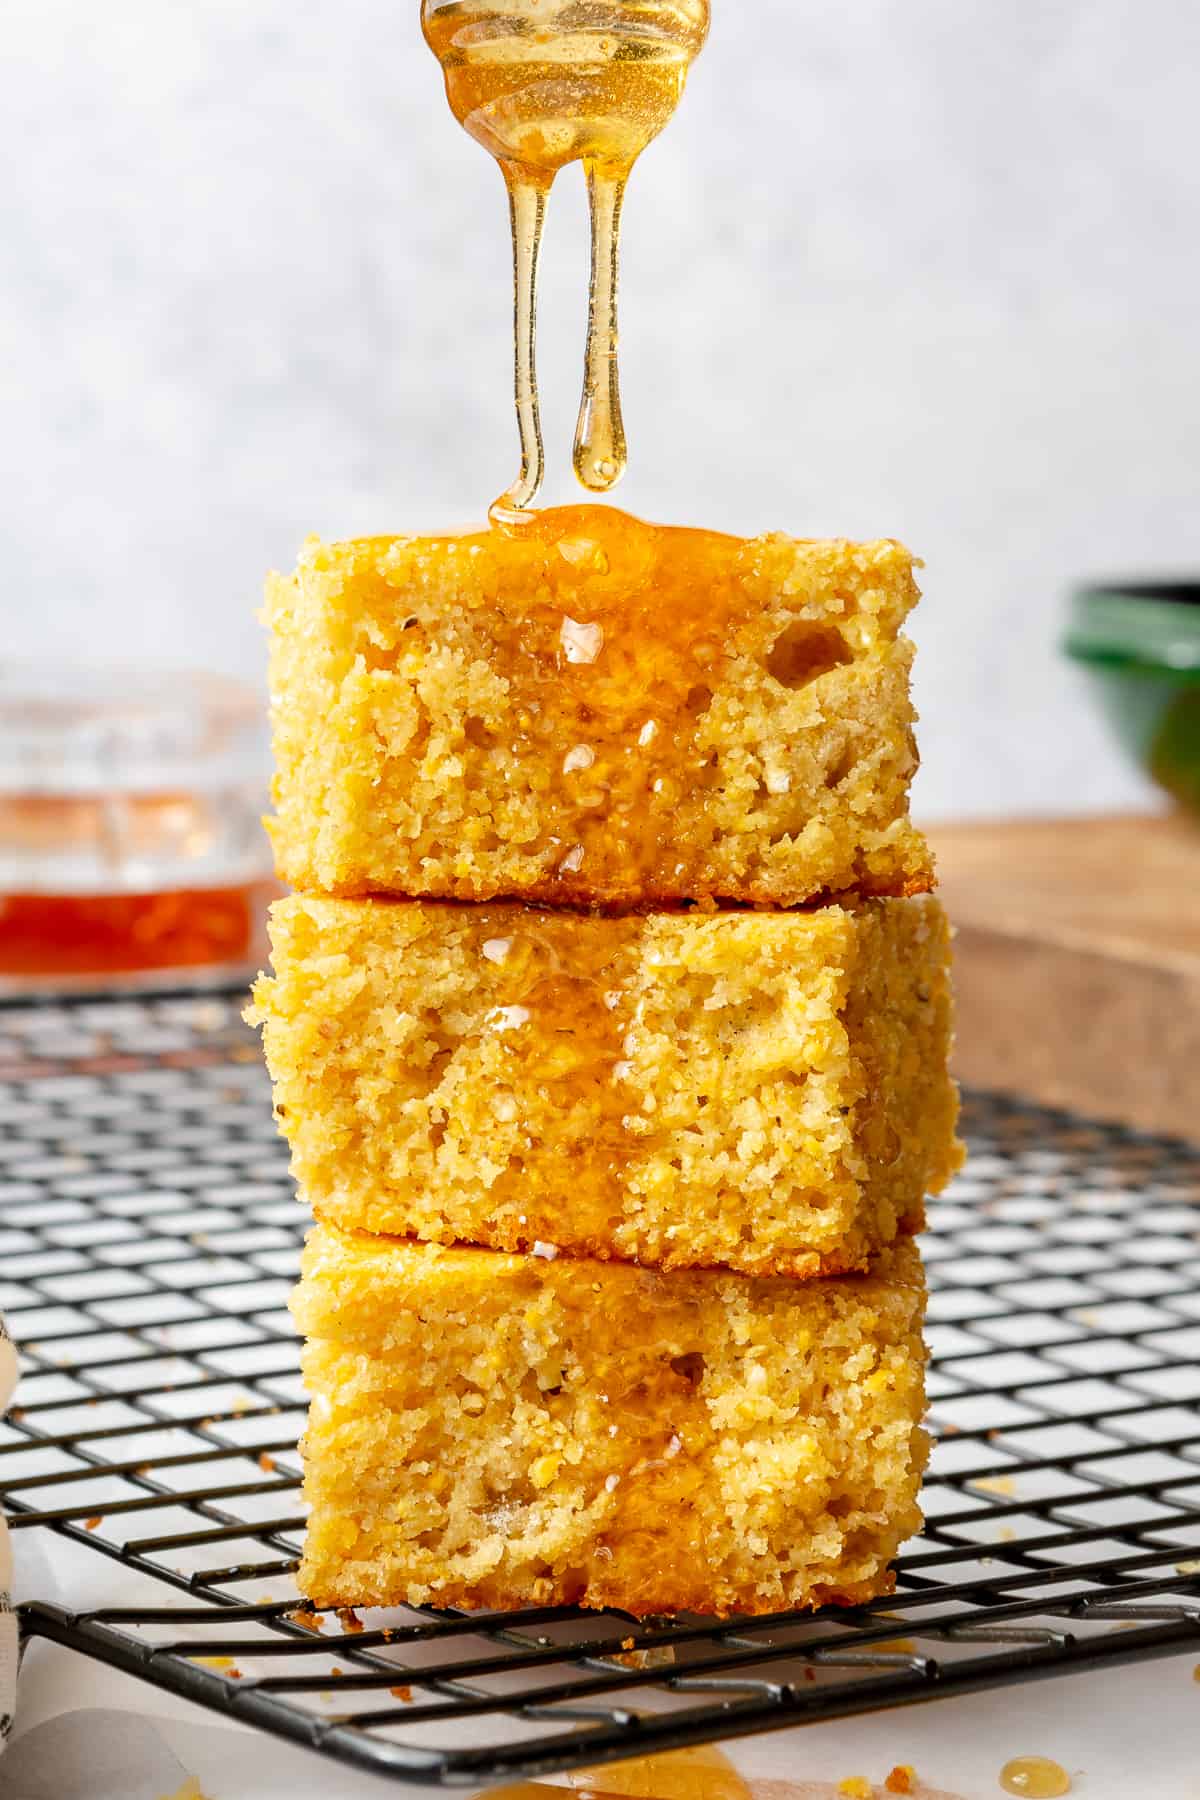 Brown Butter Skillet Cornbread Recipe - NYT Cooking